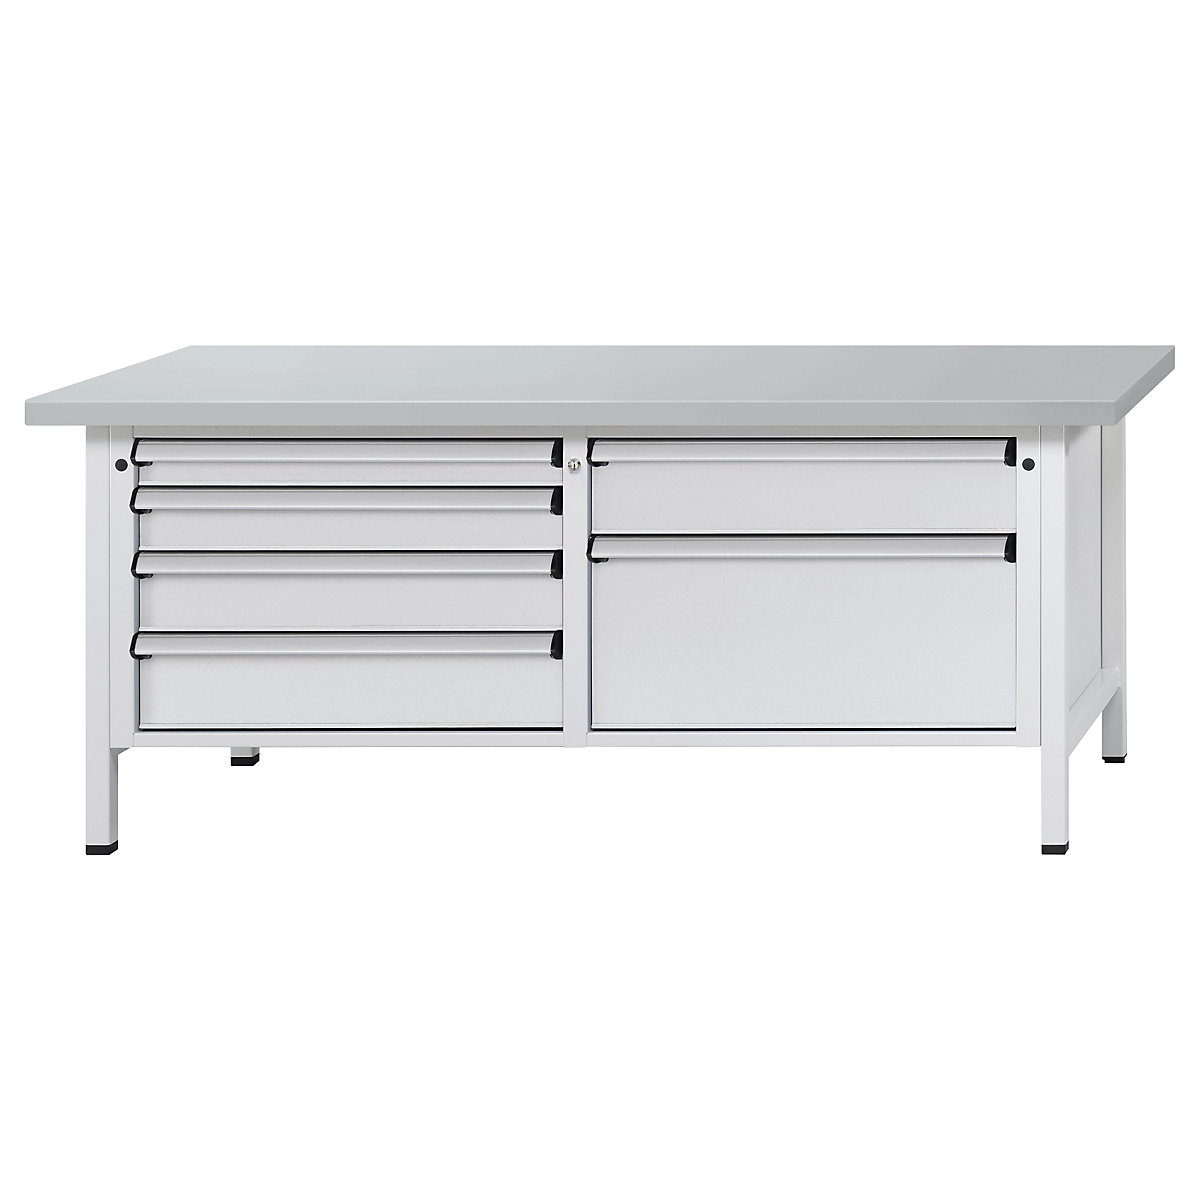 Workbench with XL/XXL drawers, frame construction – ANKE, width 2000 mm, 6 drawers, sheet steel covered worktop, front in light grey-11